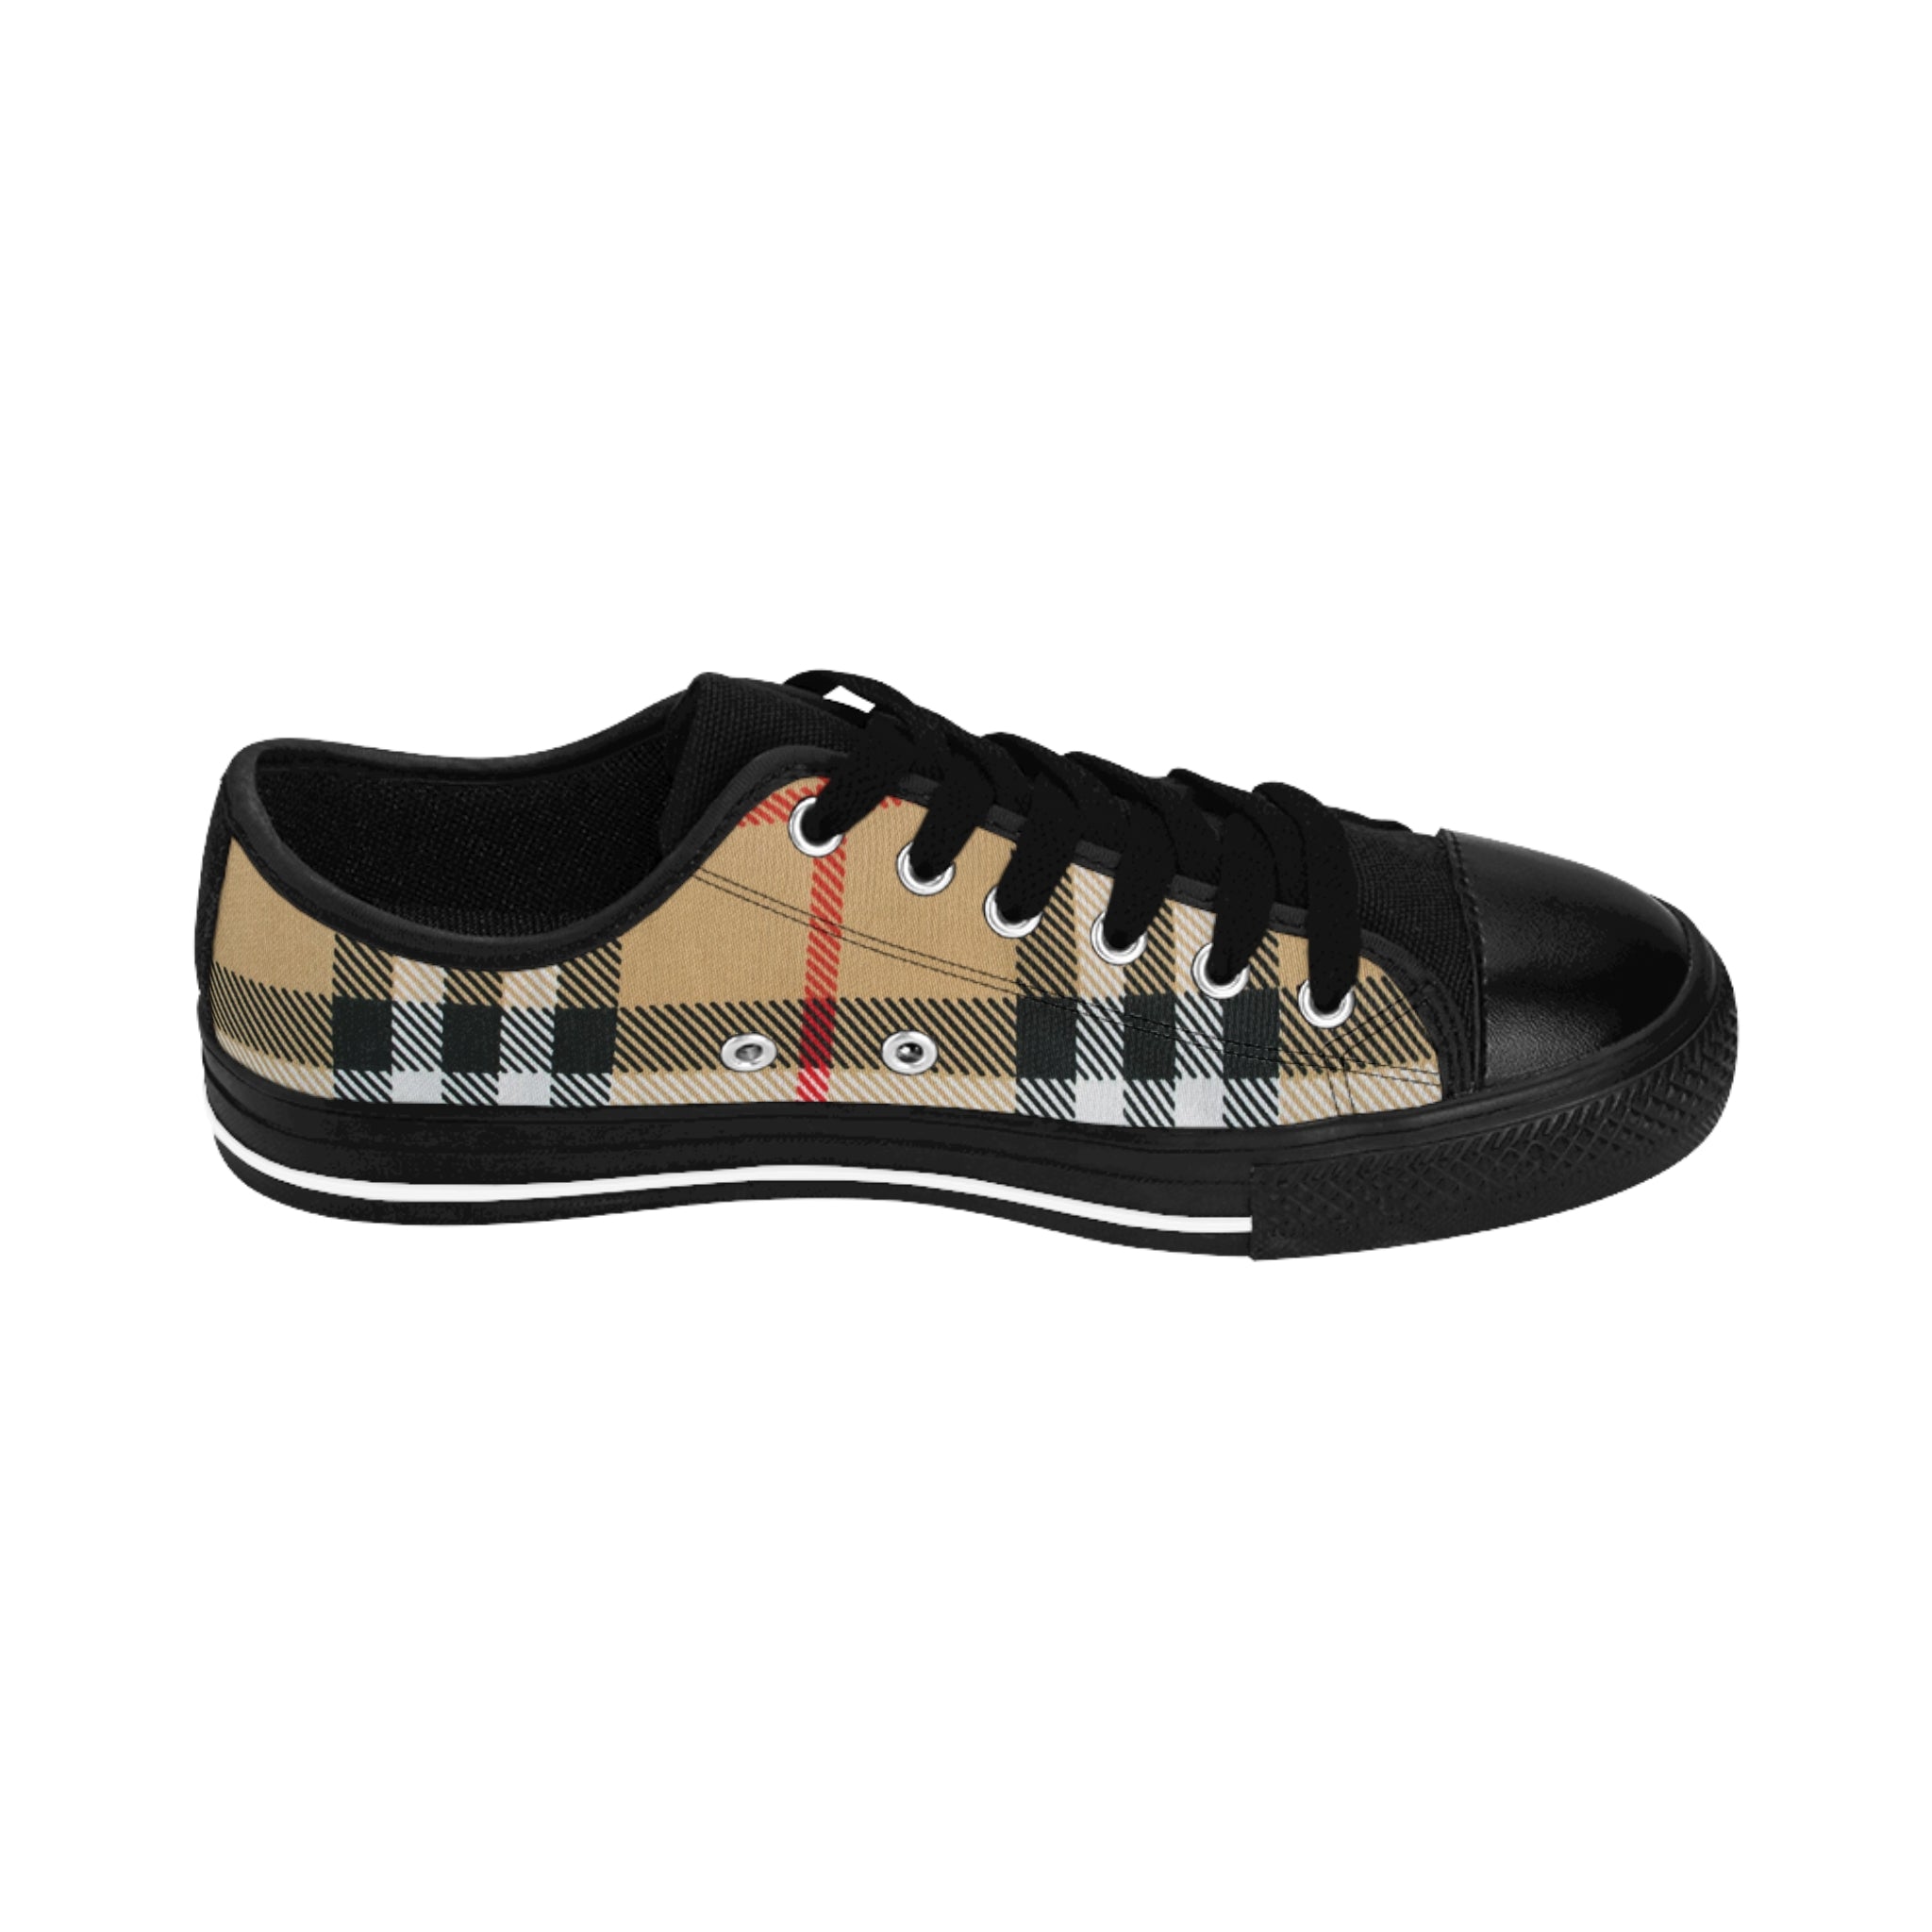  Groove Fashion Collection in Dark Plaid Men's Low Top Canvas Shoes, Men's Casual Shoes SneakersUS14Blacksole